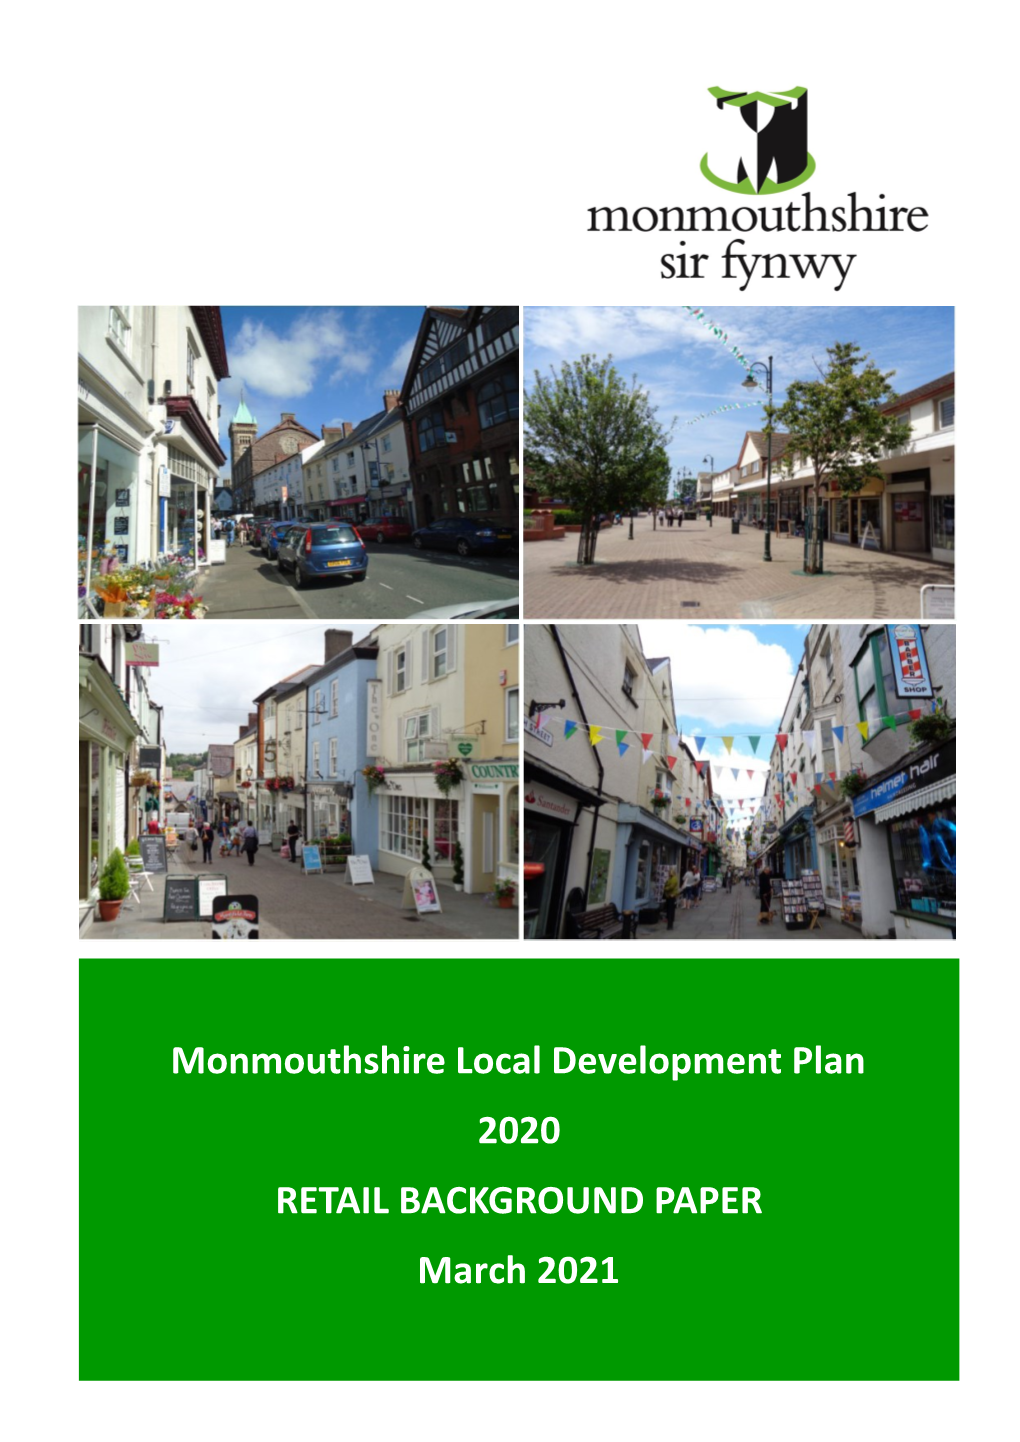 Monmouthshire Local Development Plan 2020 RETAIL BACKGROUND PAPER March 2021 Monmouthshire County Council Local Development Plan